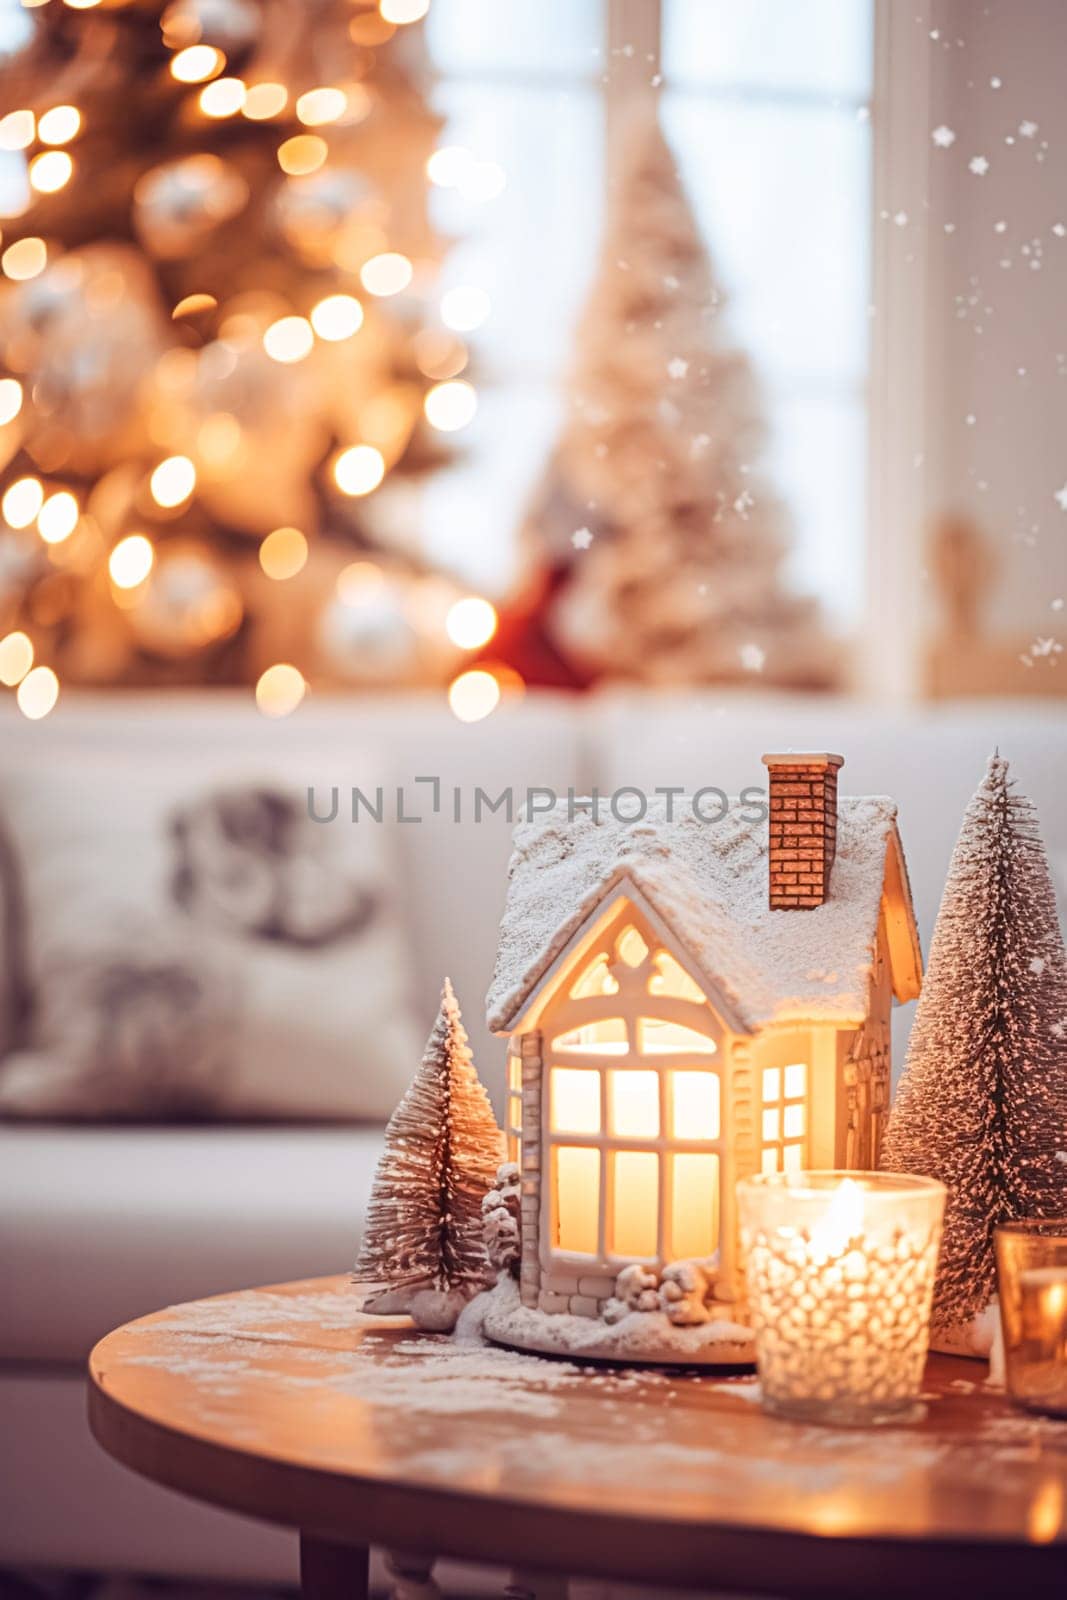 Christmas toy house home decor, country cottage style house decoration for an English countryside home, winter holiday celebration and festive atmosphere, Merry Christmas and Happy Holidays by Anneleven